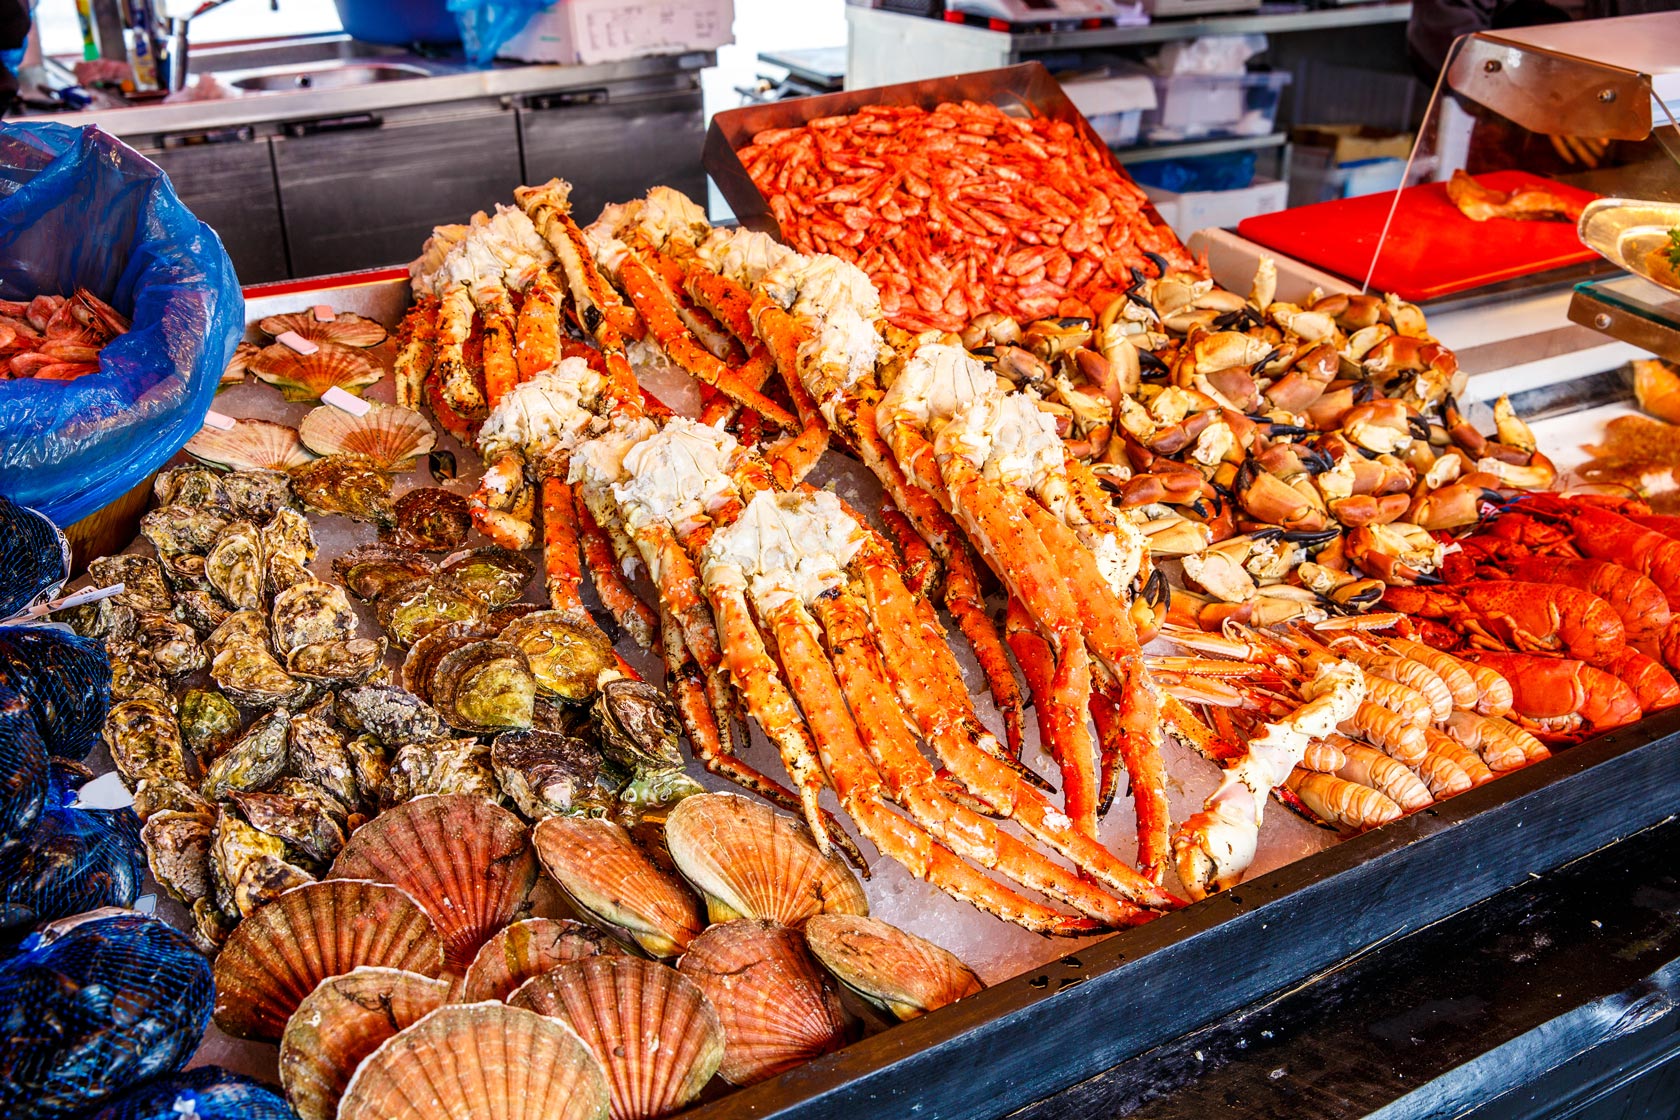 Various seafood on the shelves of the fish market in Norway, Bergen